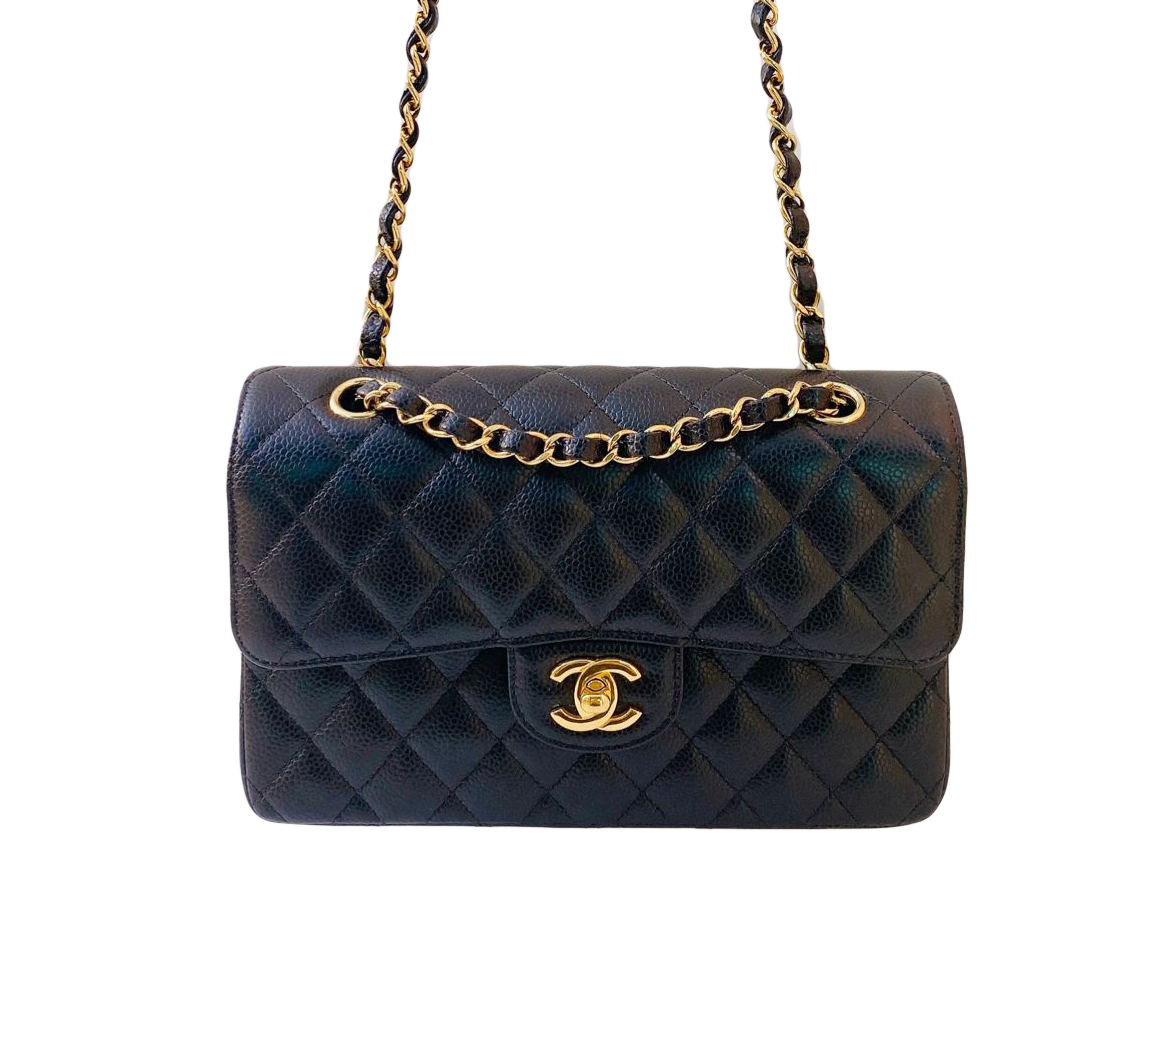 BLACK CAVIAR LEATHER SMALL CLASSIC DOUBLE FLAP BAG - styleforless